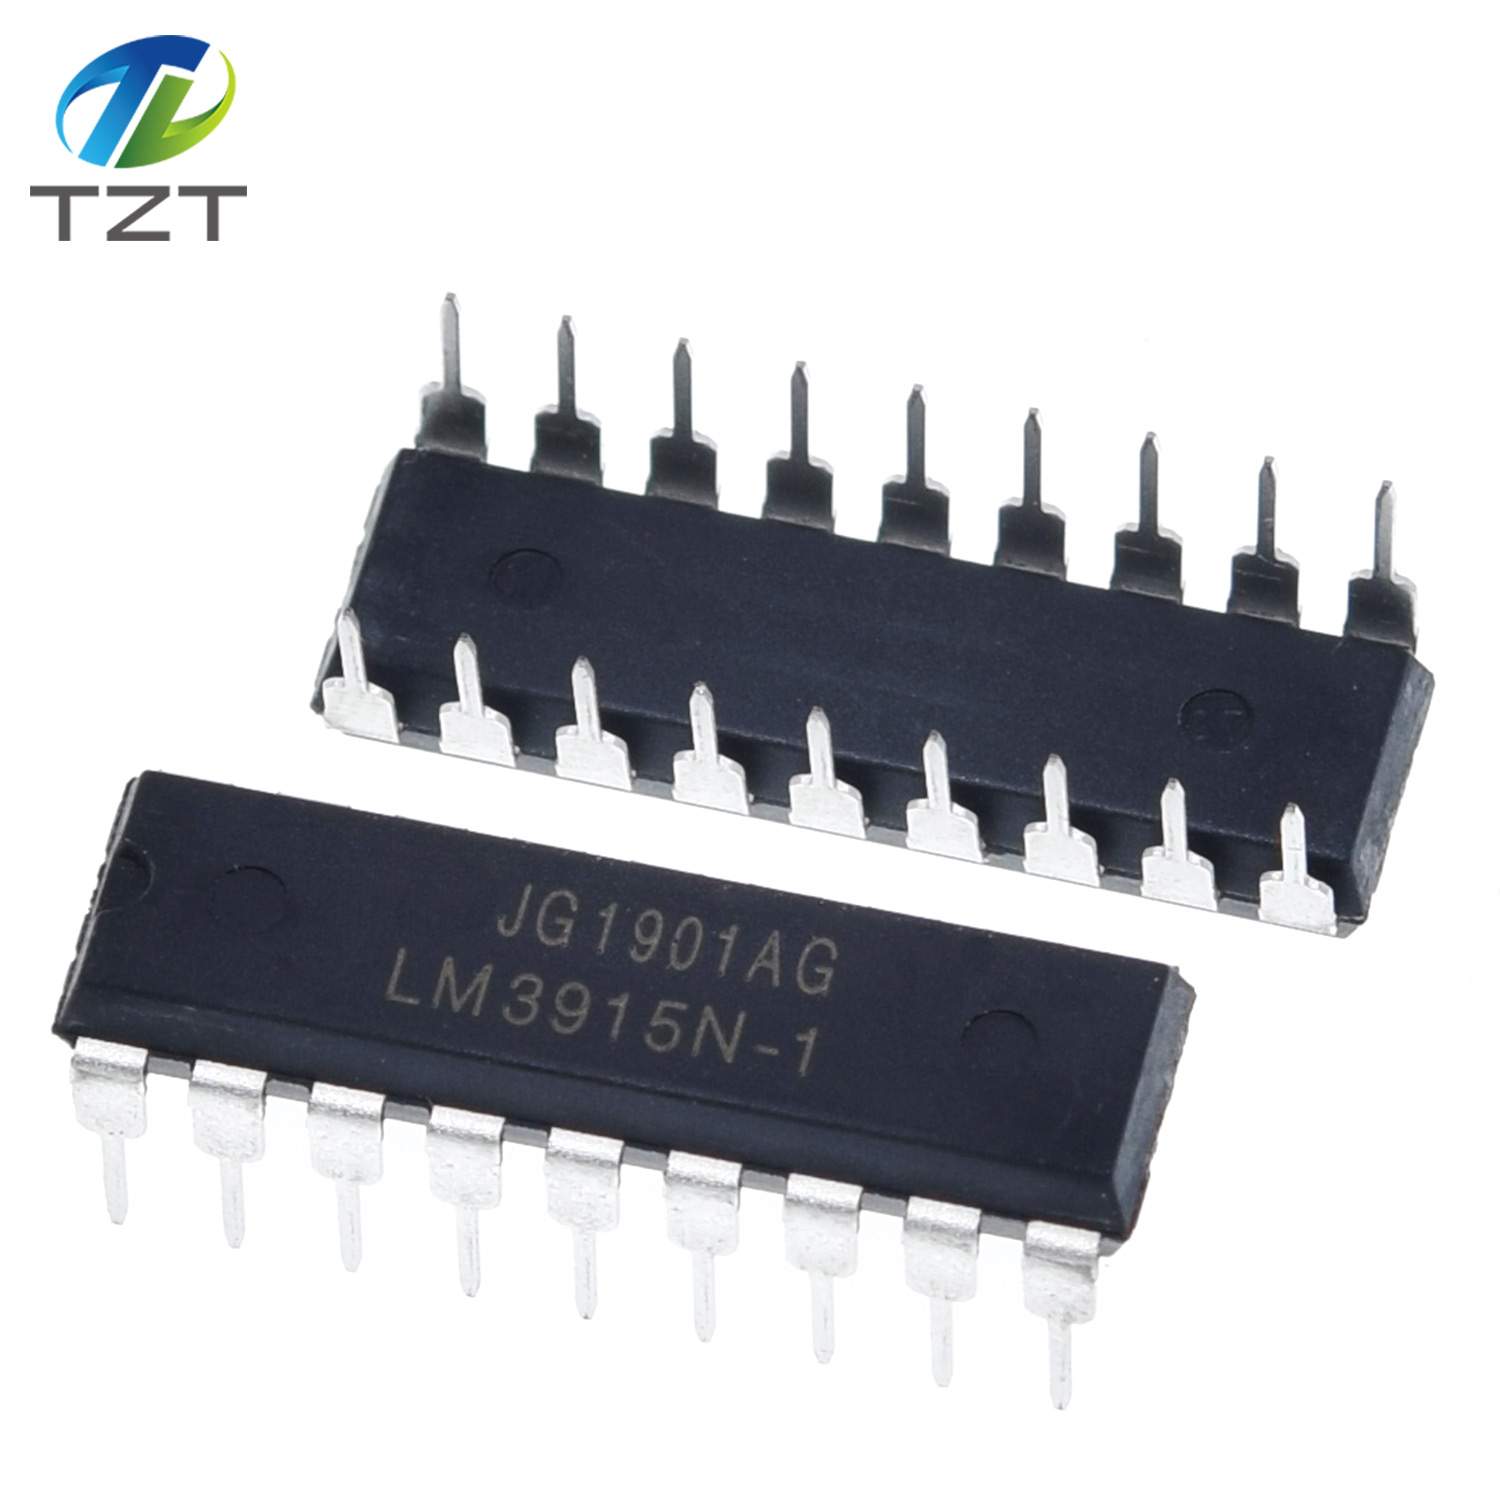 TZT 1PCS LM3915N LM3915N-1 LM3915 DIP18 in stock new and Original IC